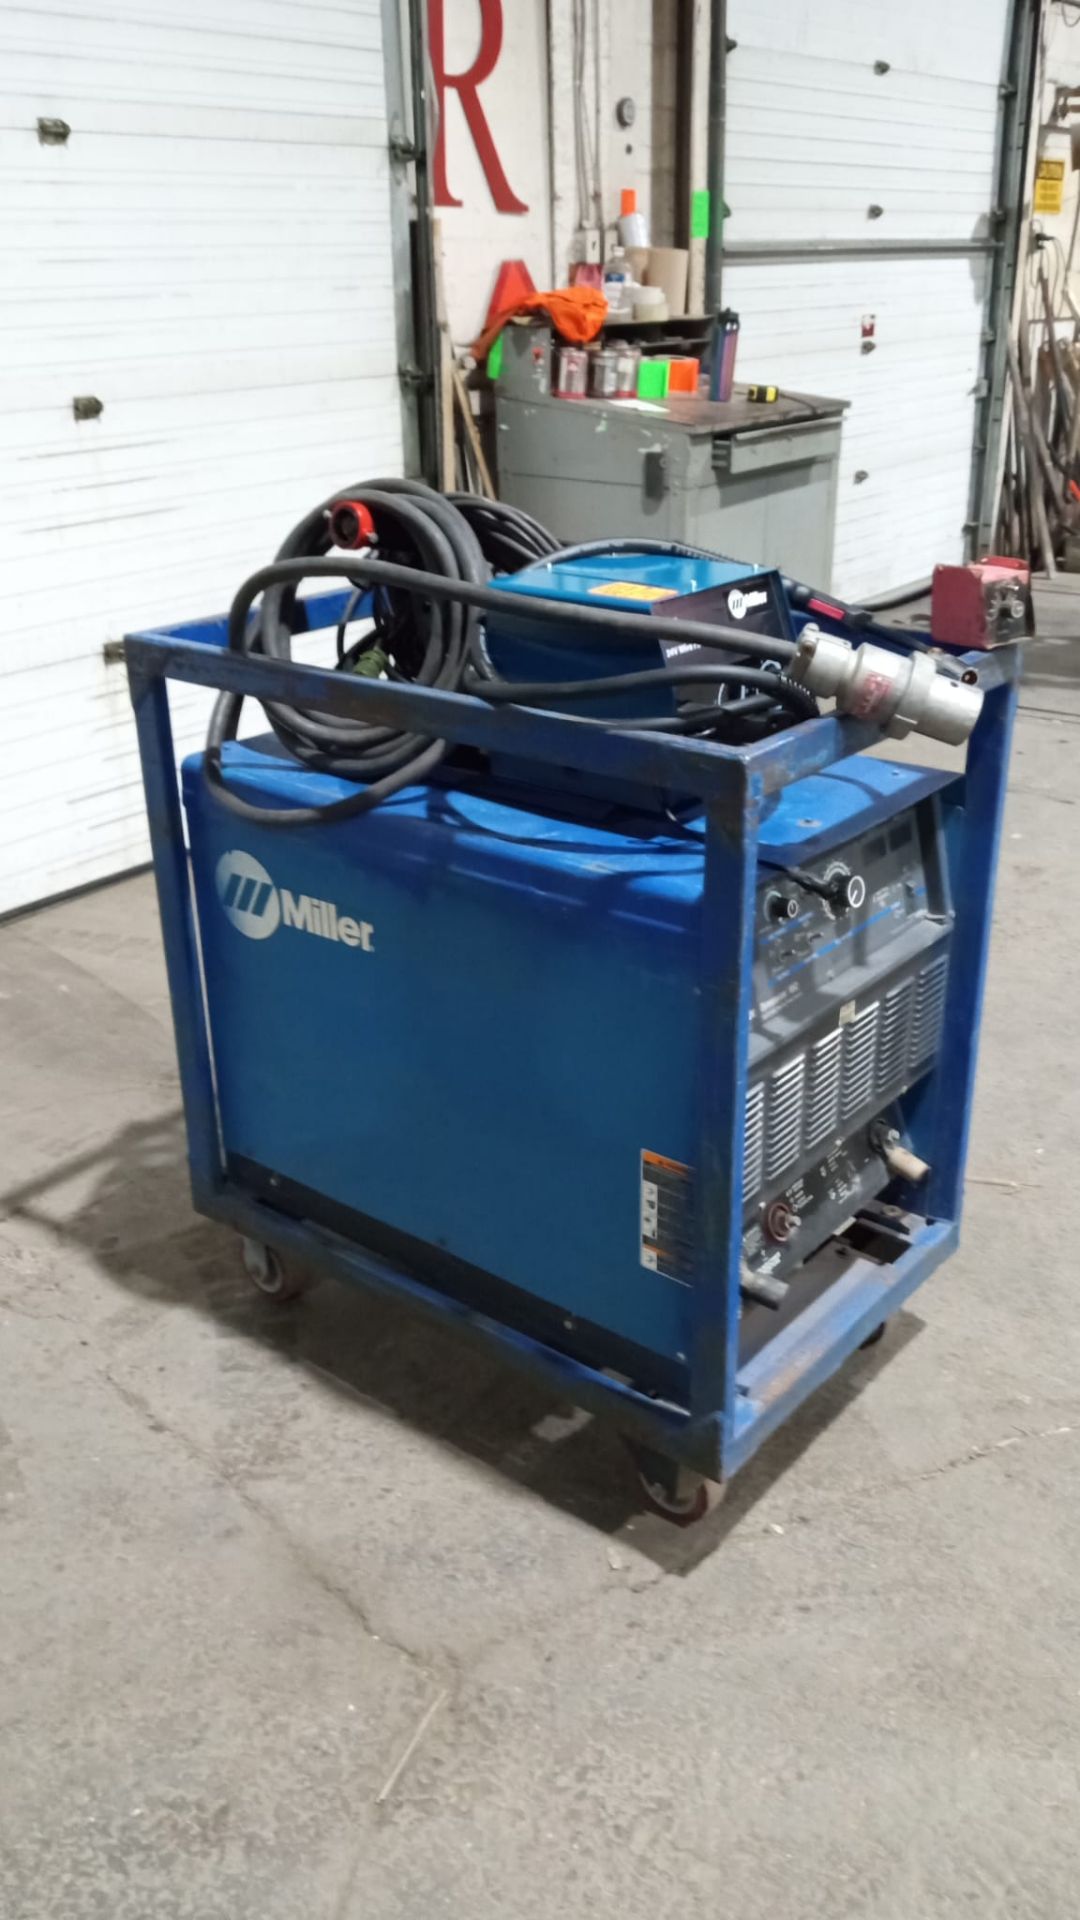 Miller Dimension 652 Mig Welder 650 Amp Mig Tig Stick Multi-Process Power Source with Wire Feeder - Image 2 of 3